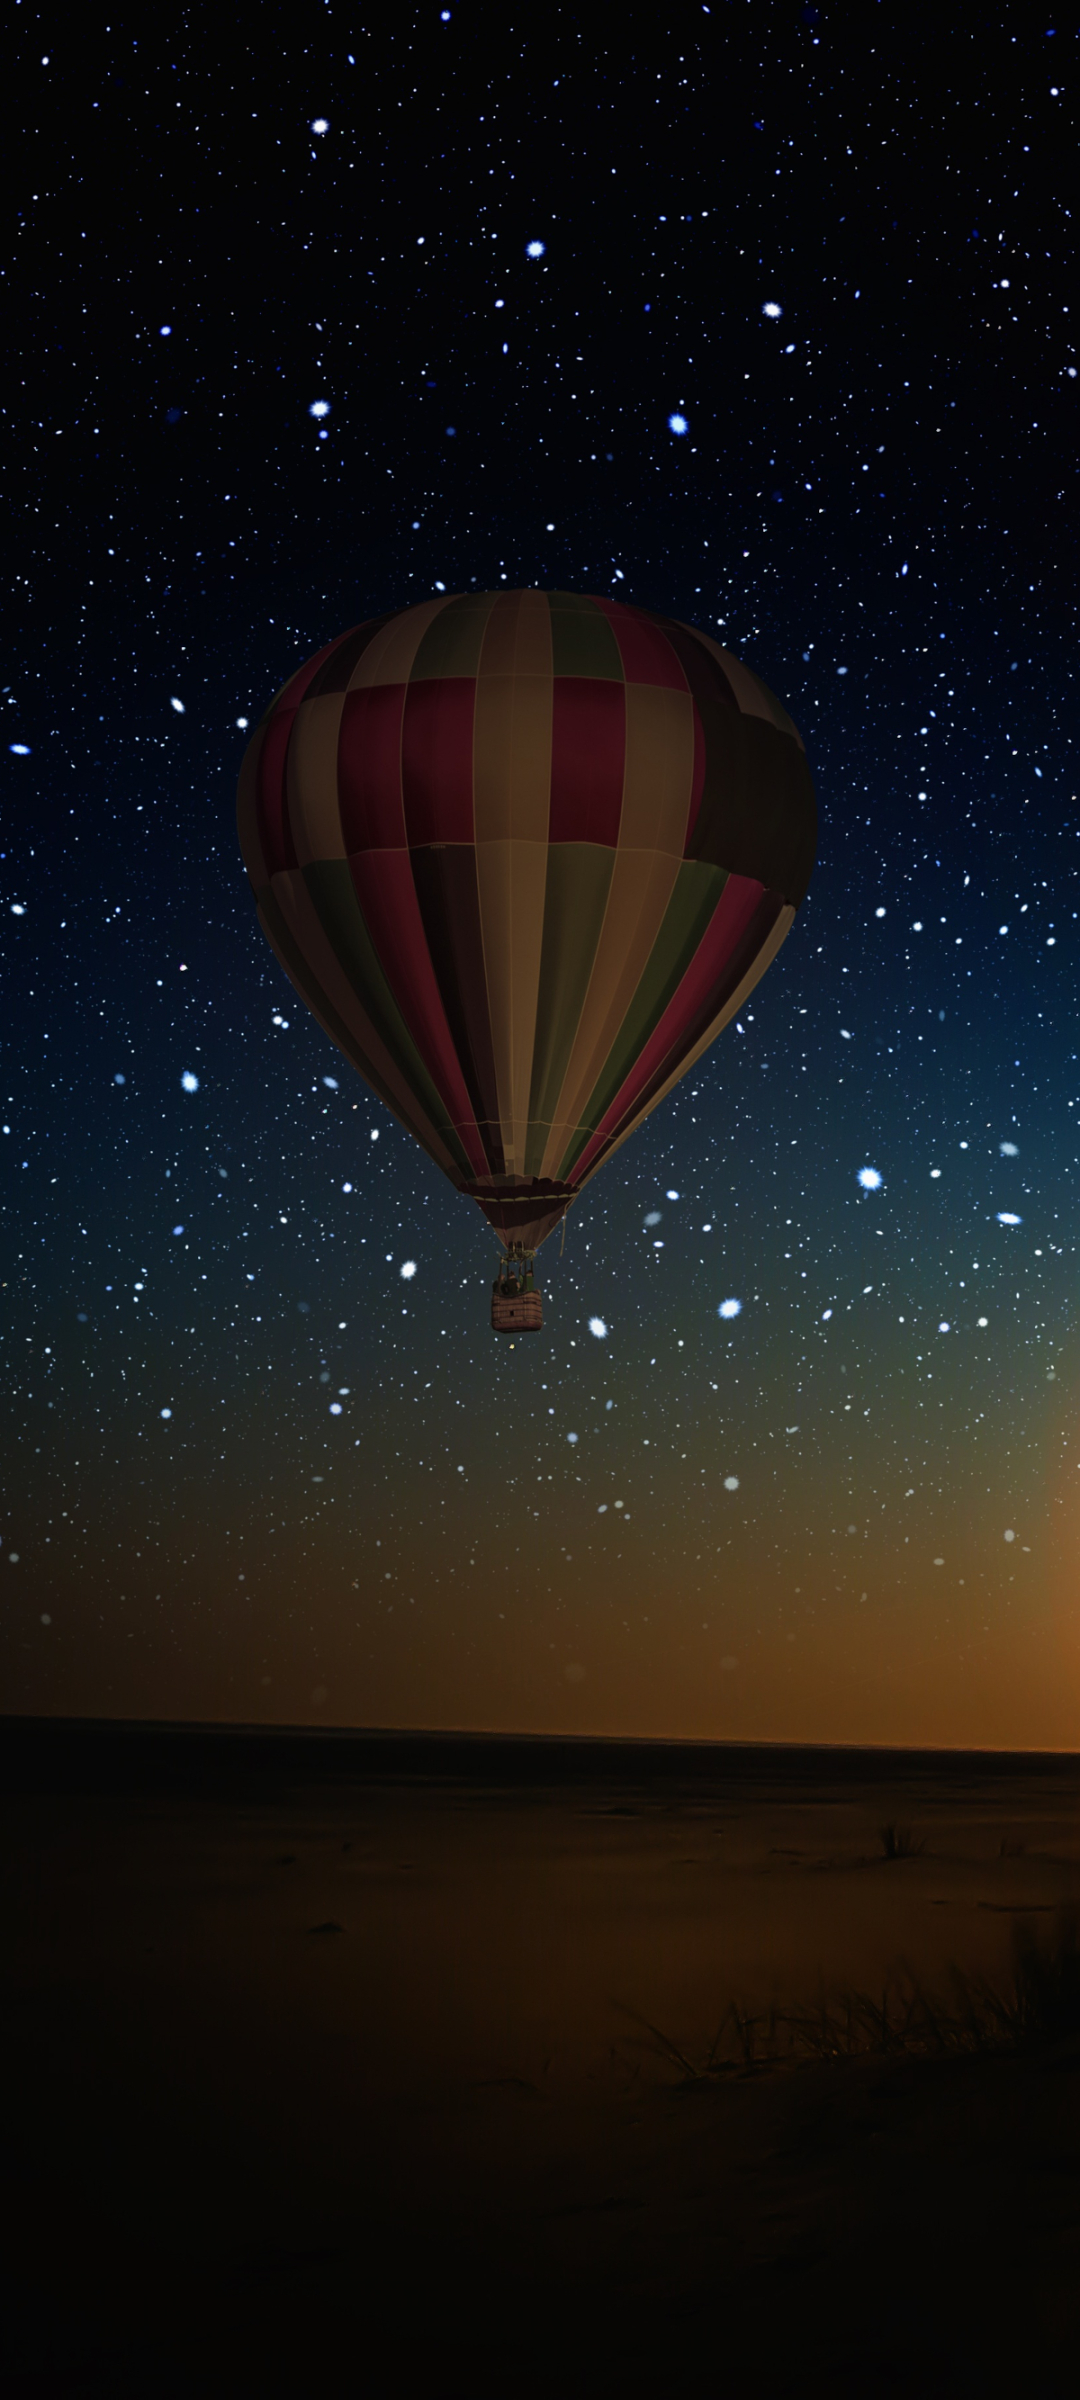 Hot Air Balloon on a Starry Night